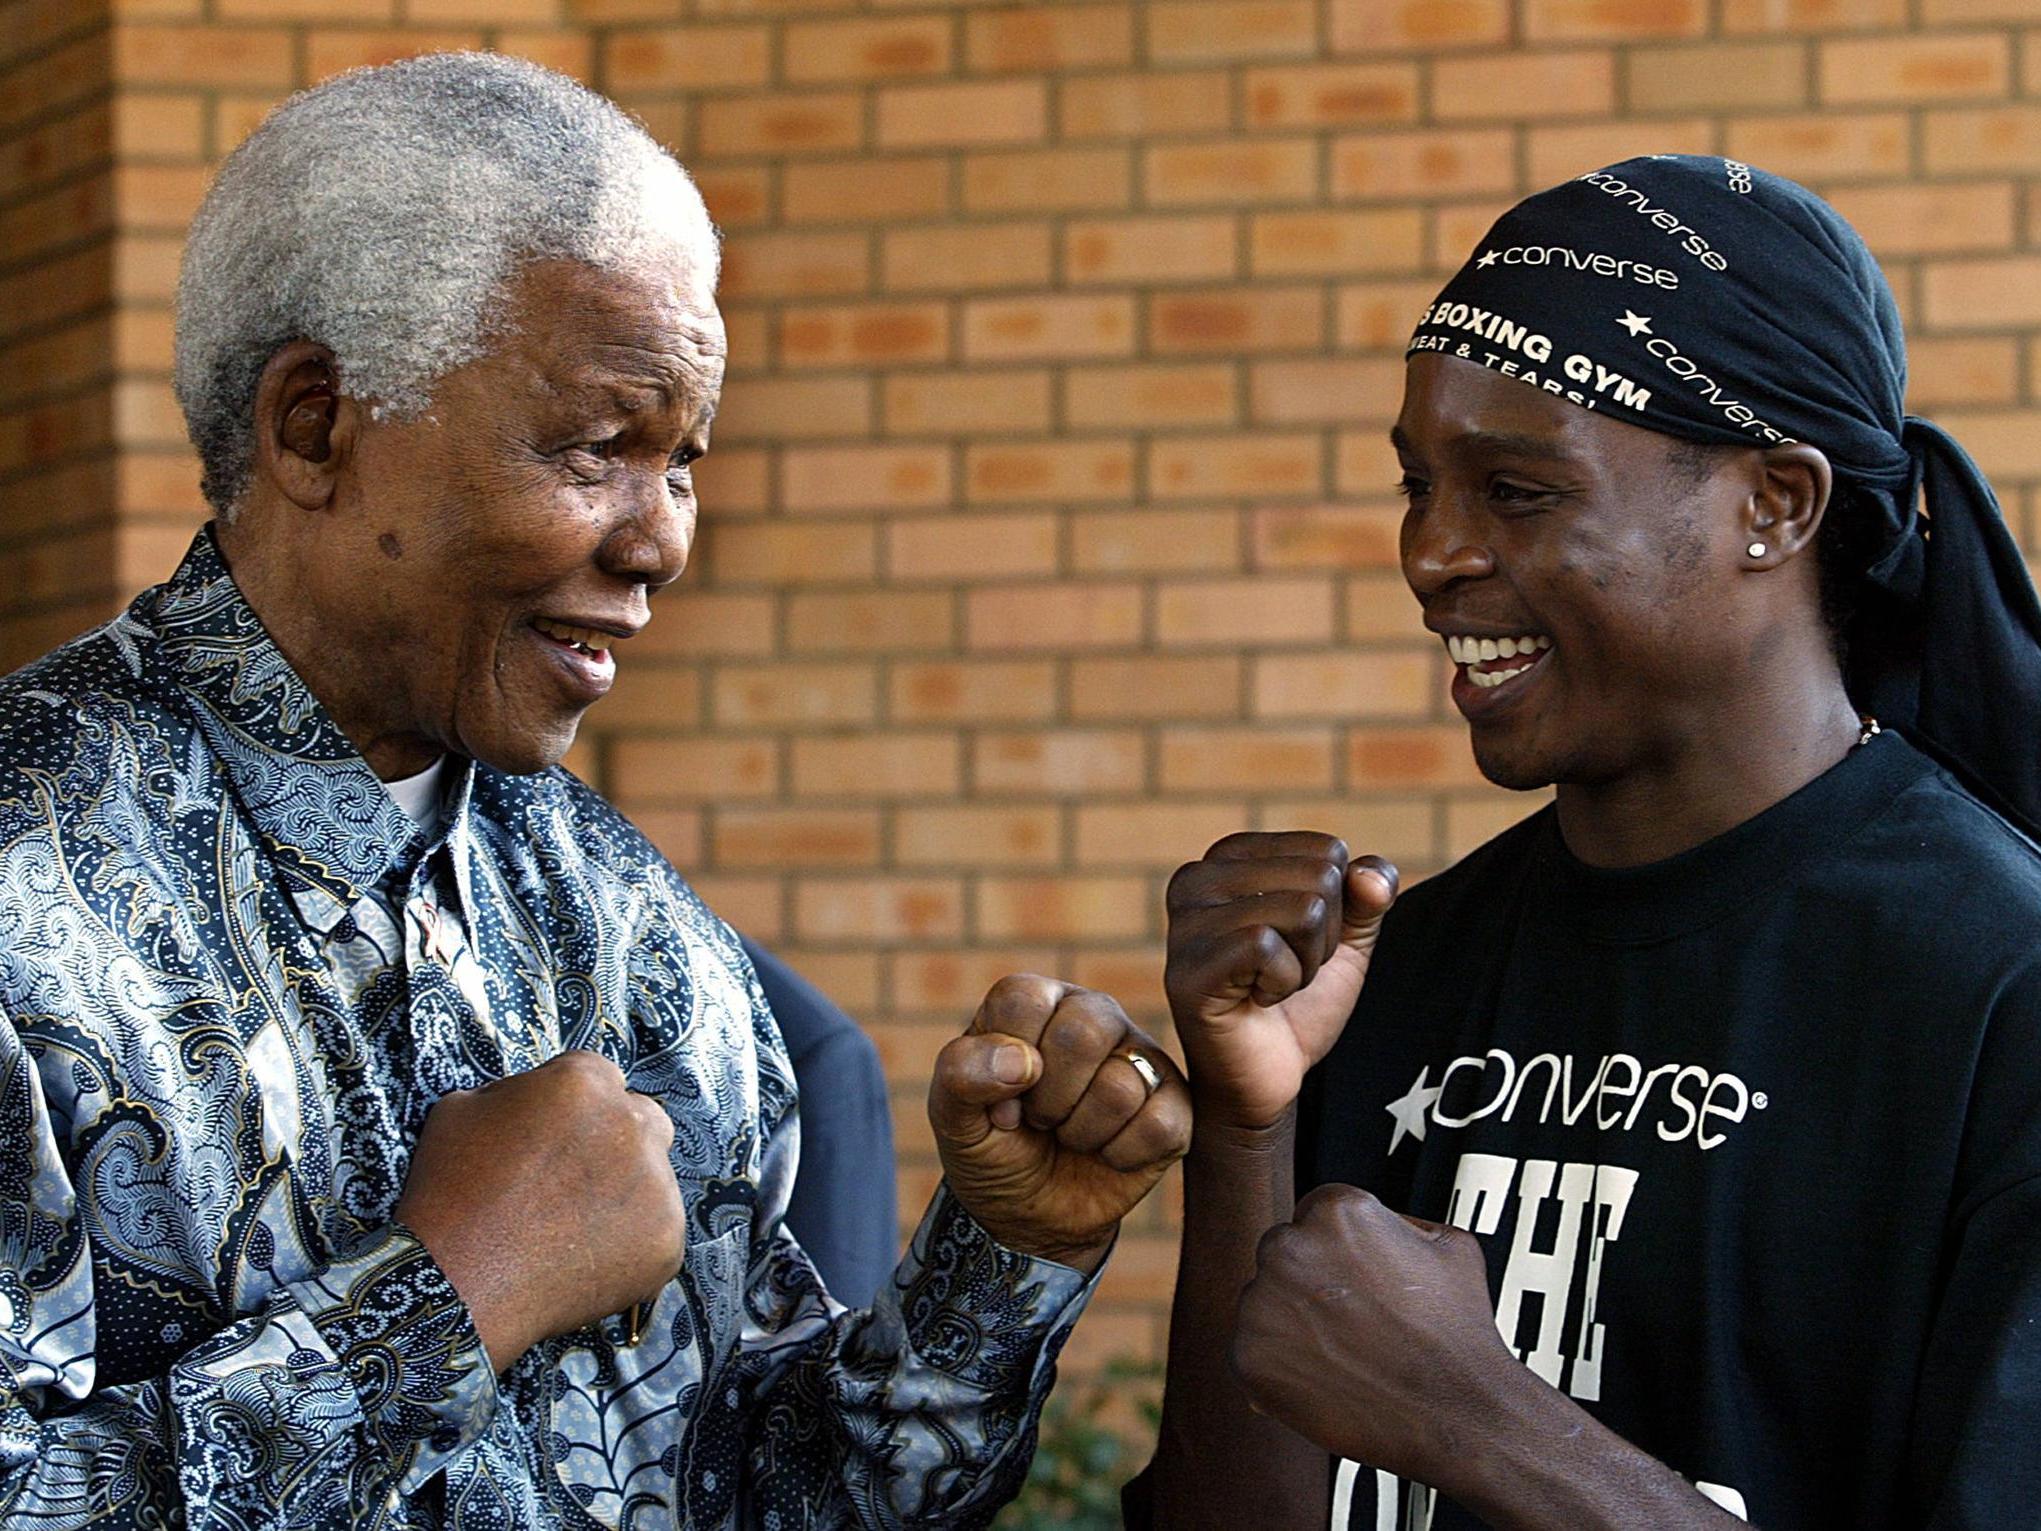 South Africa's former president was an avid boxer and didn't let jail get in the way of mainting his fitness routine